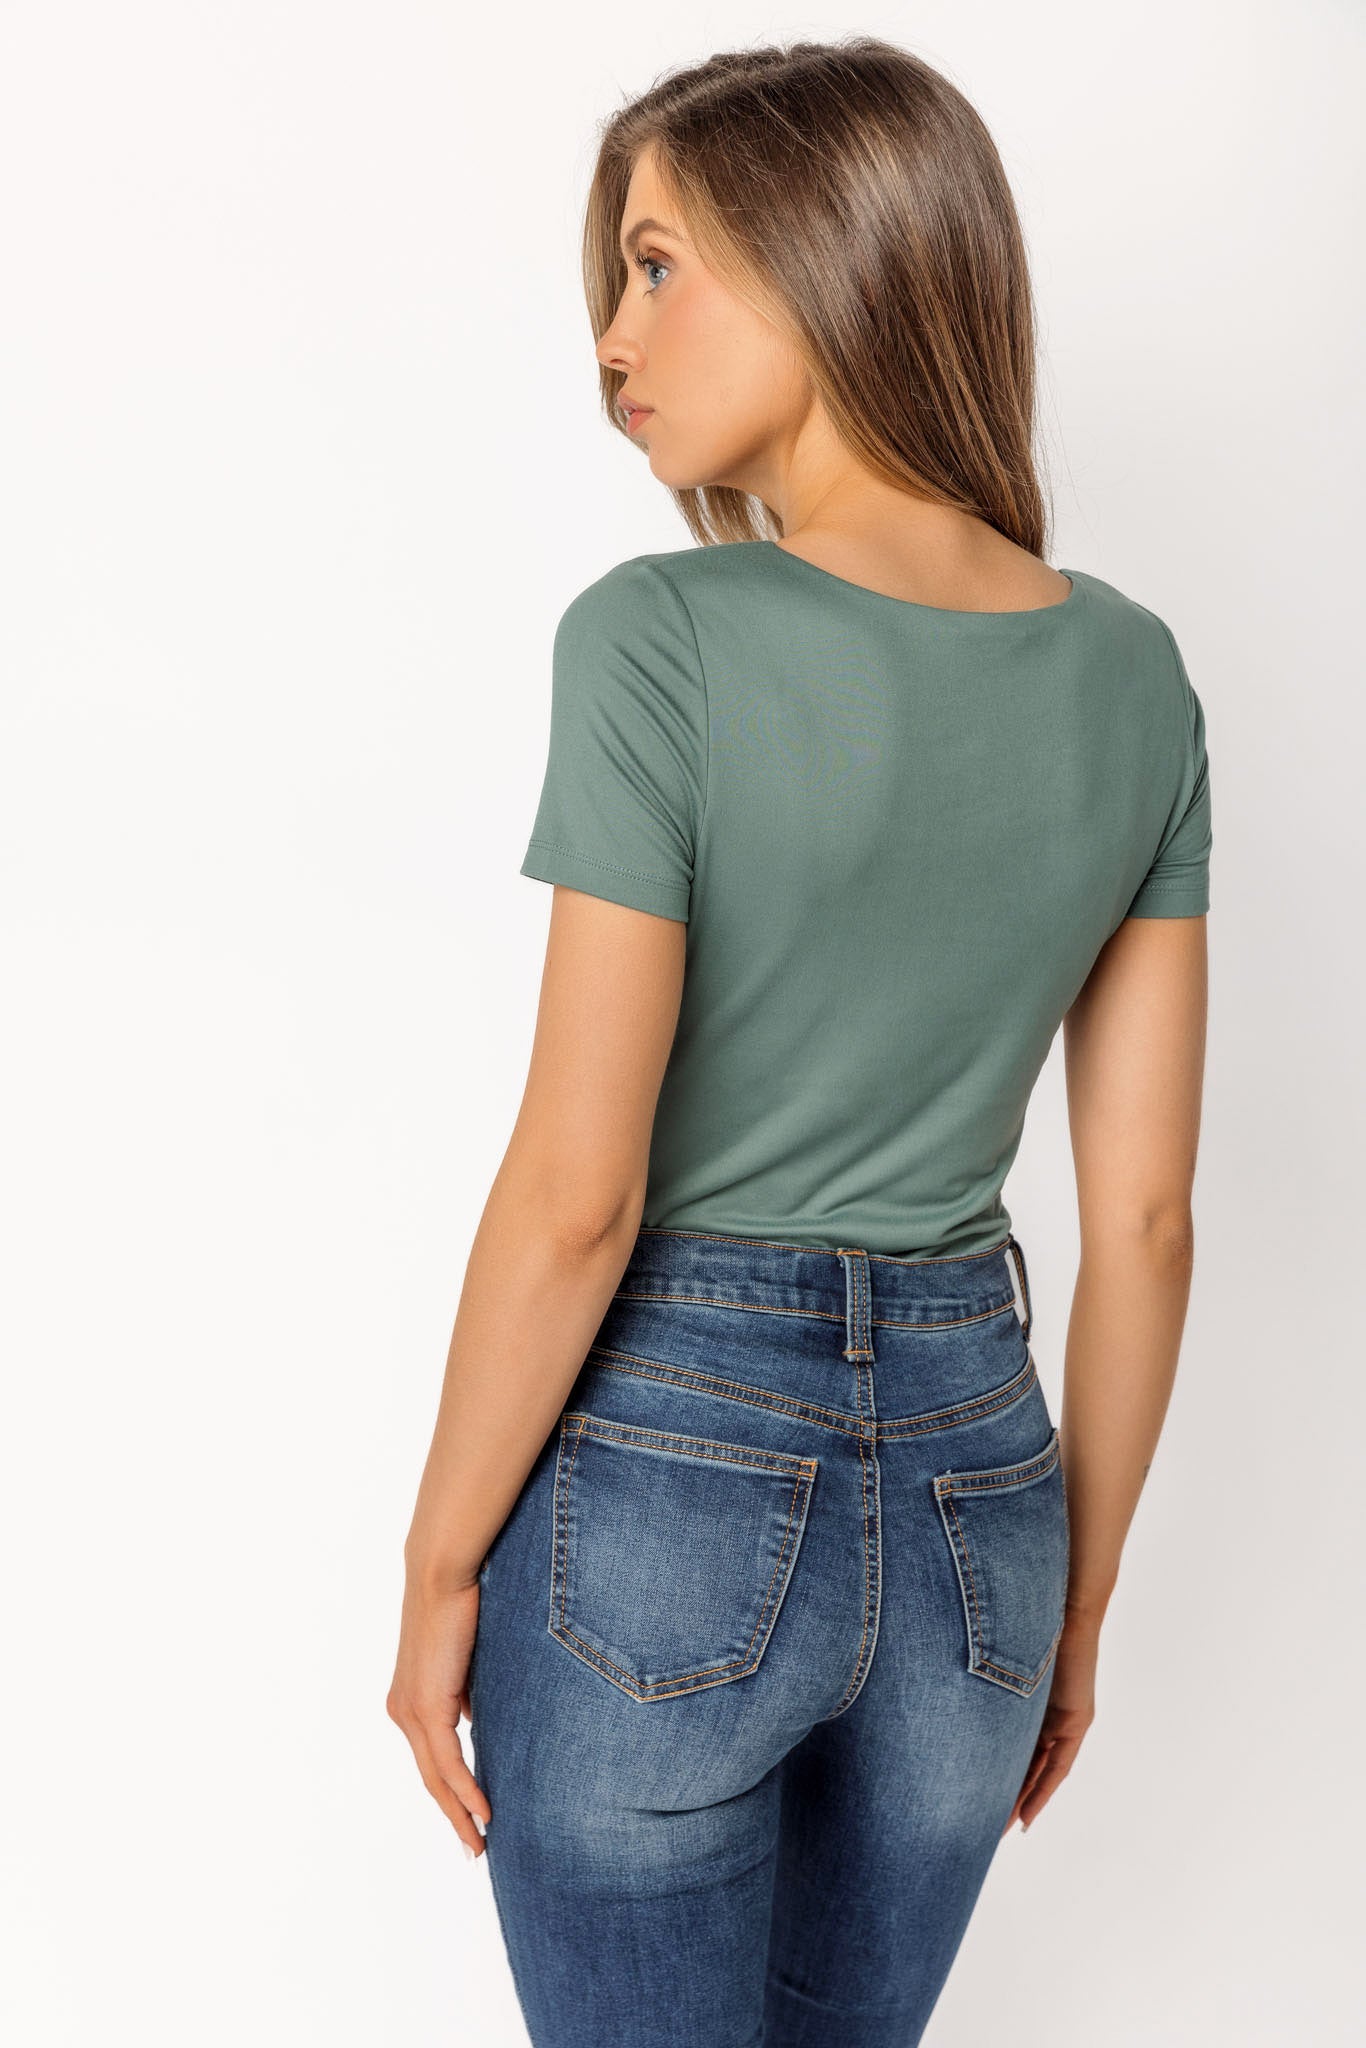 Short Sleeve Square Neck Top